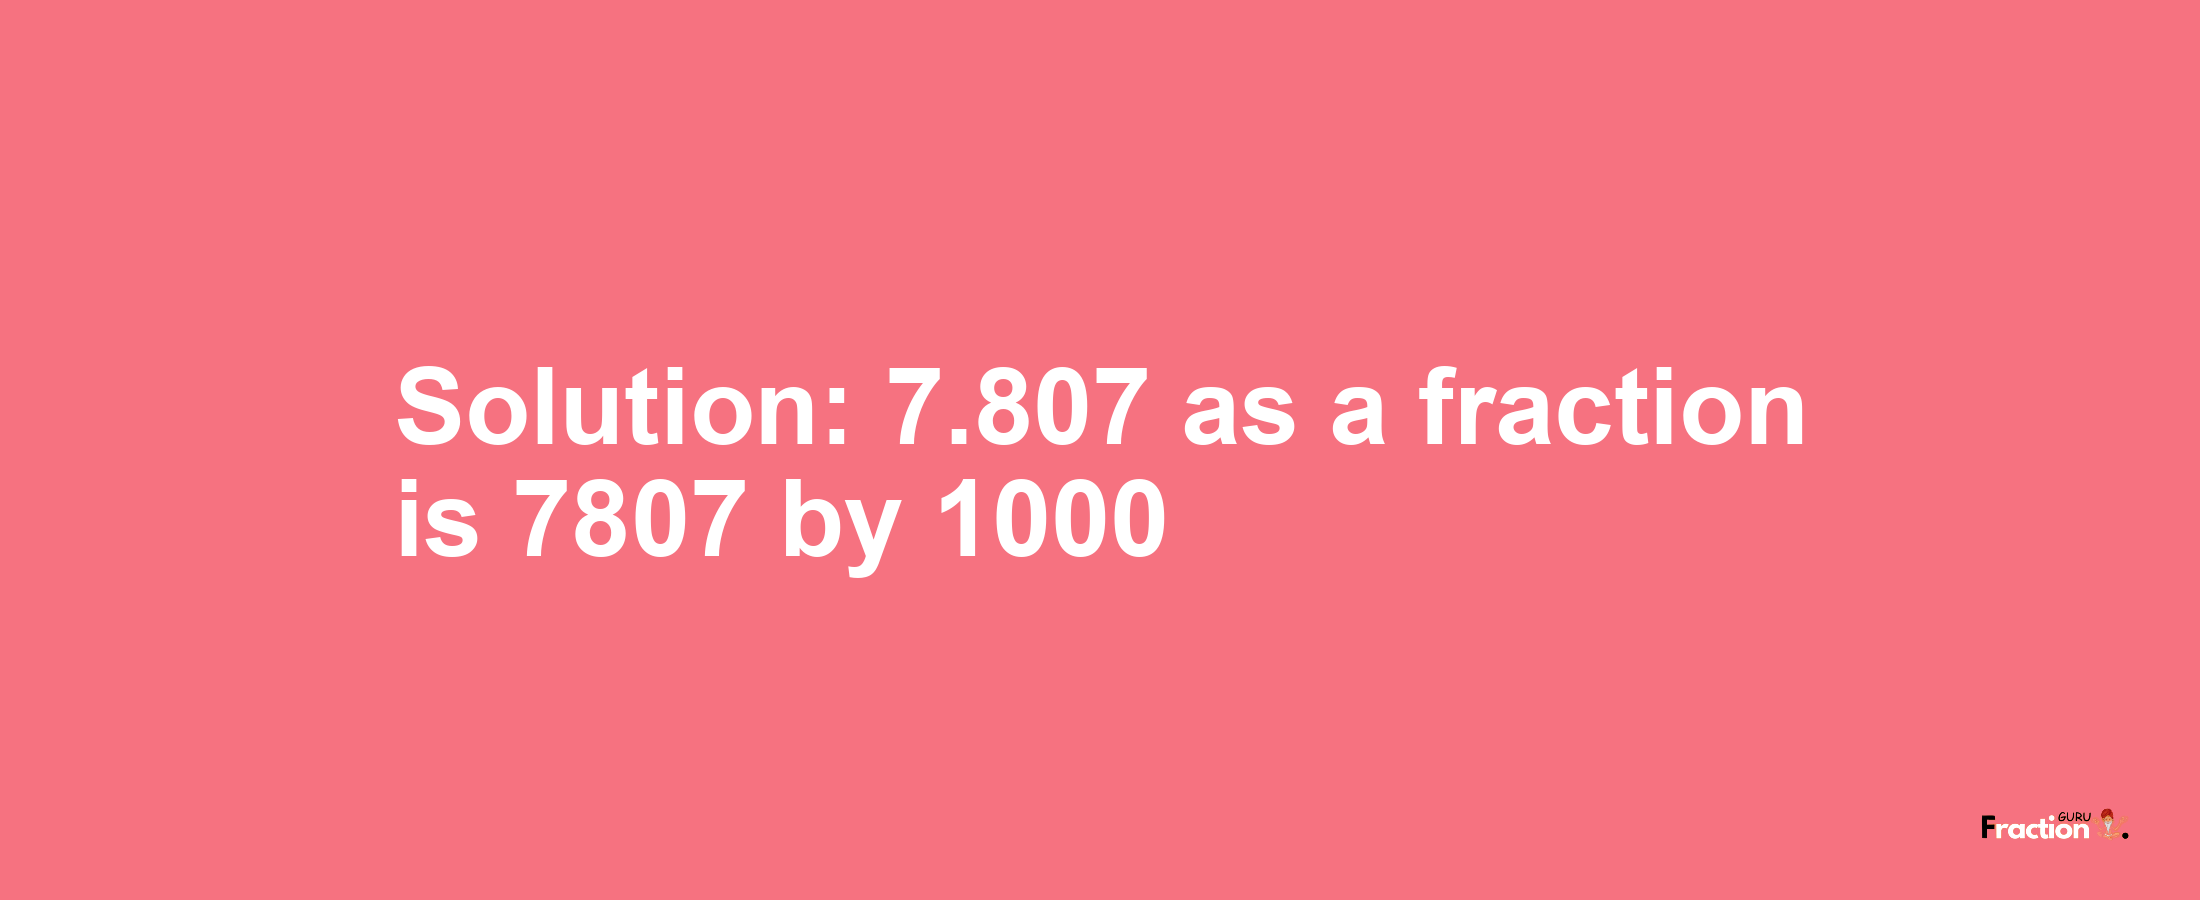 Solution:7.807 as a fraction is 7807/1000